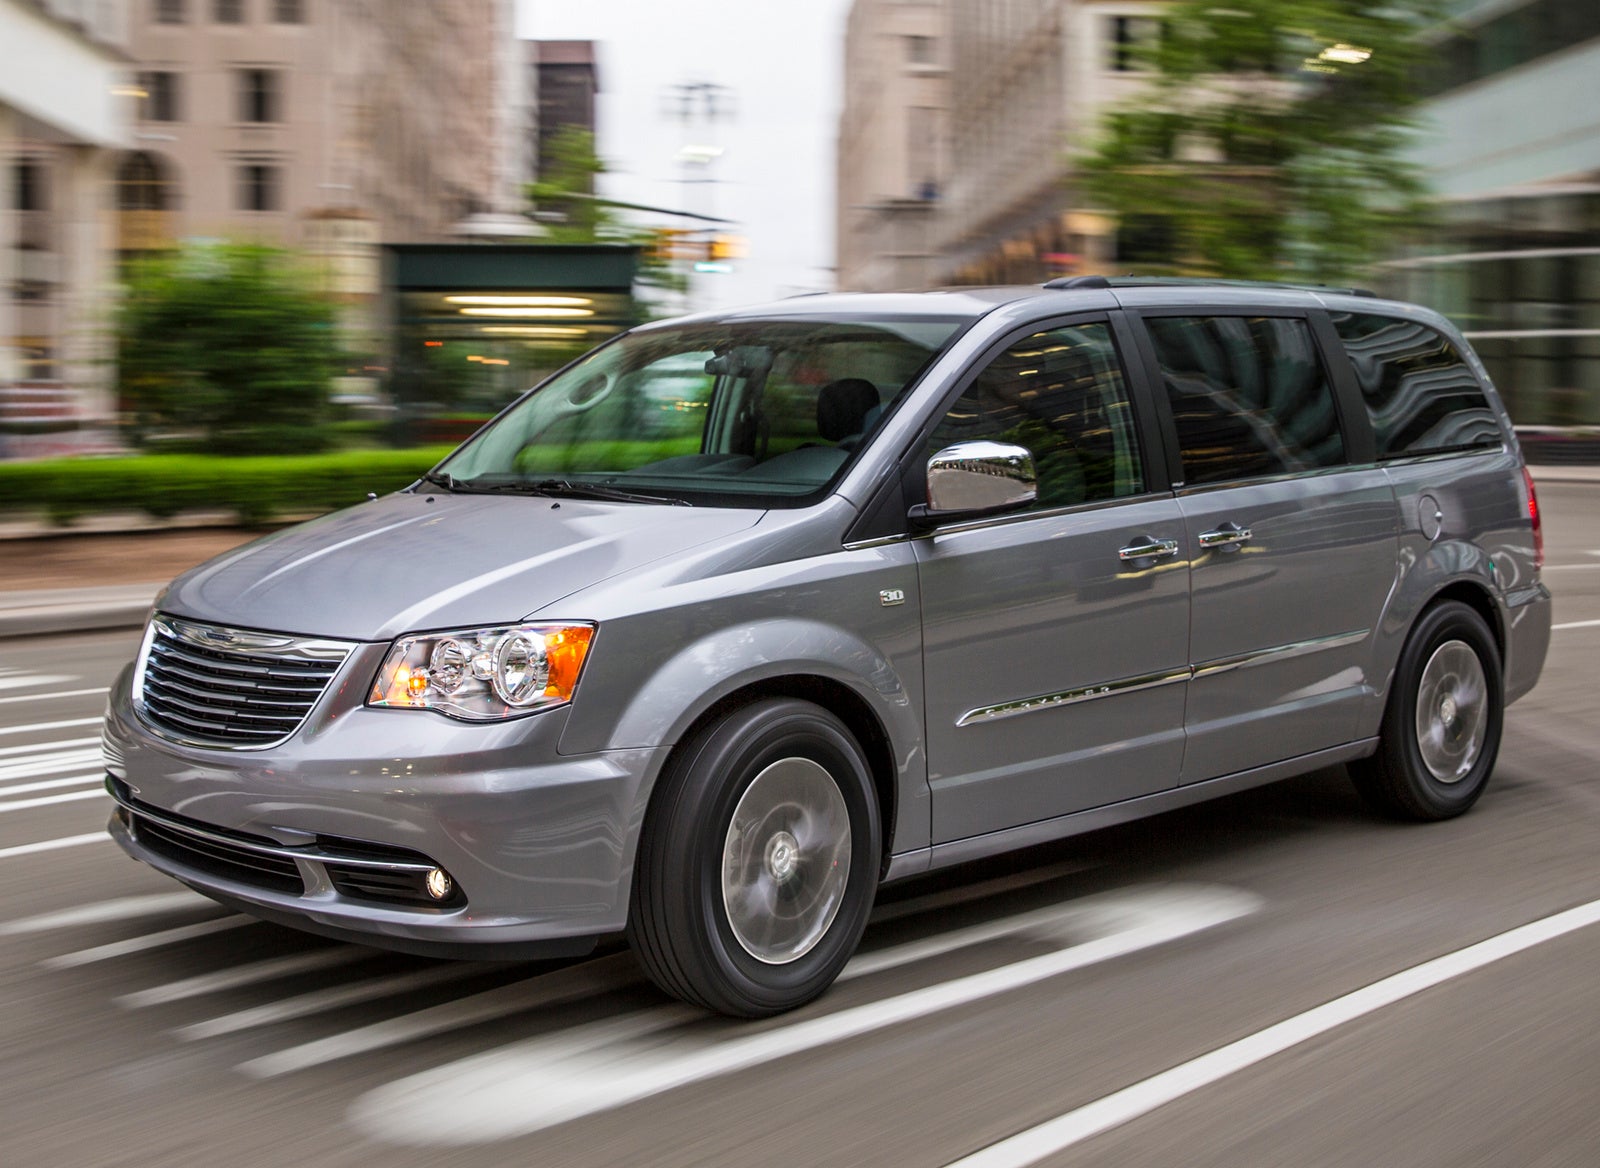 2014 Chrysler Town & Country Overview CarGurus